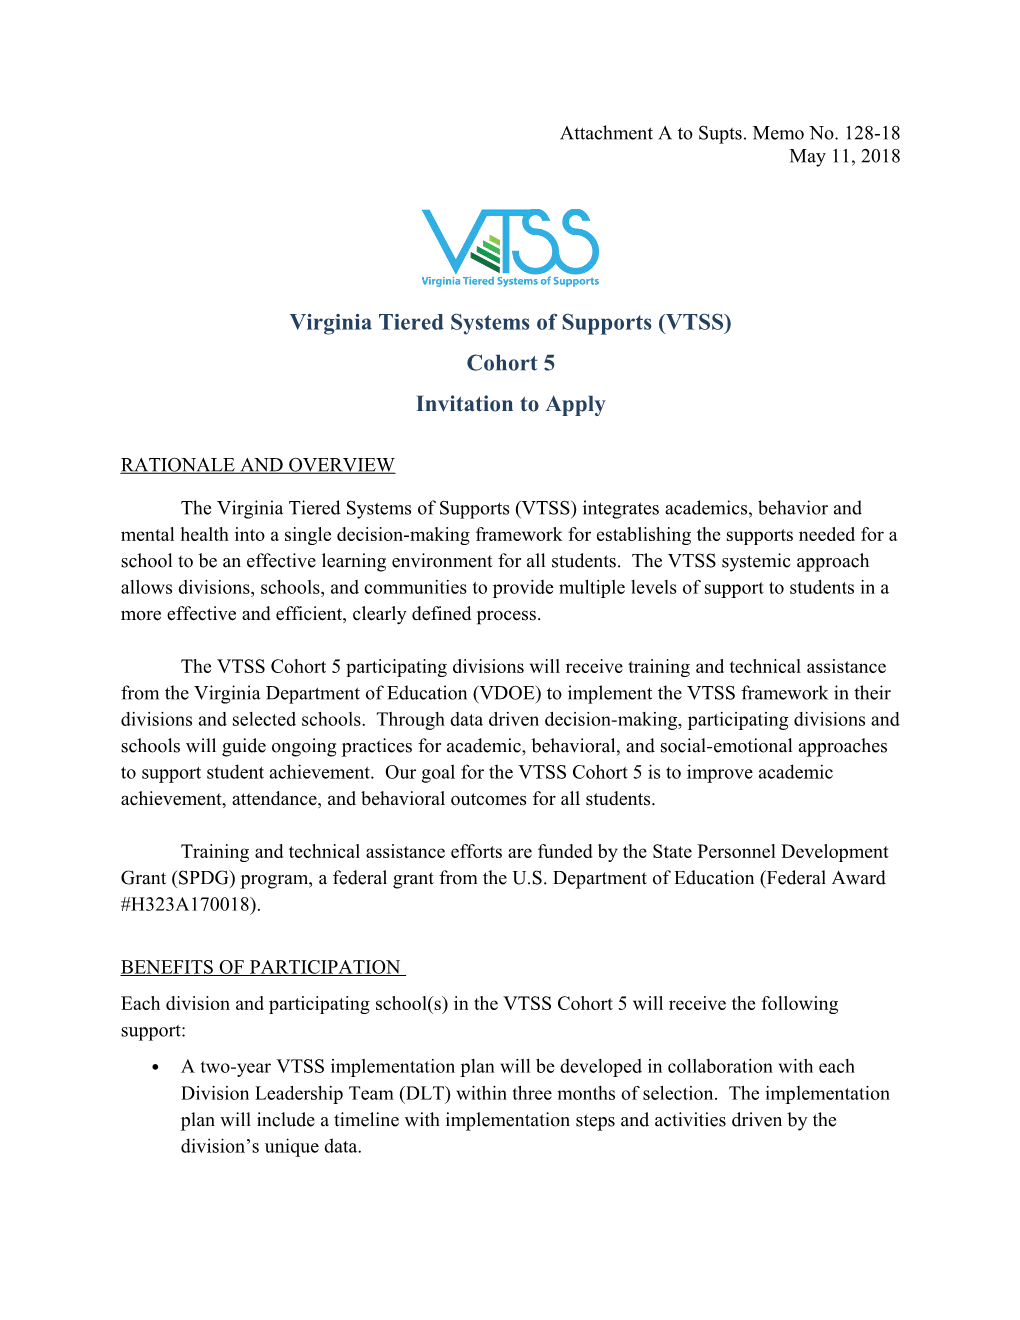 Virginia Tiered Systems of Supports (VTSS)